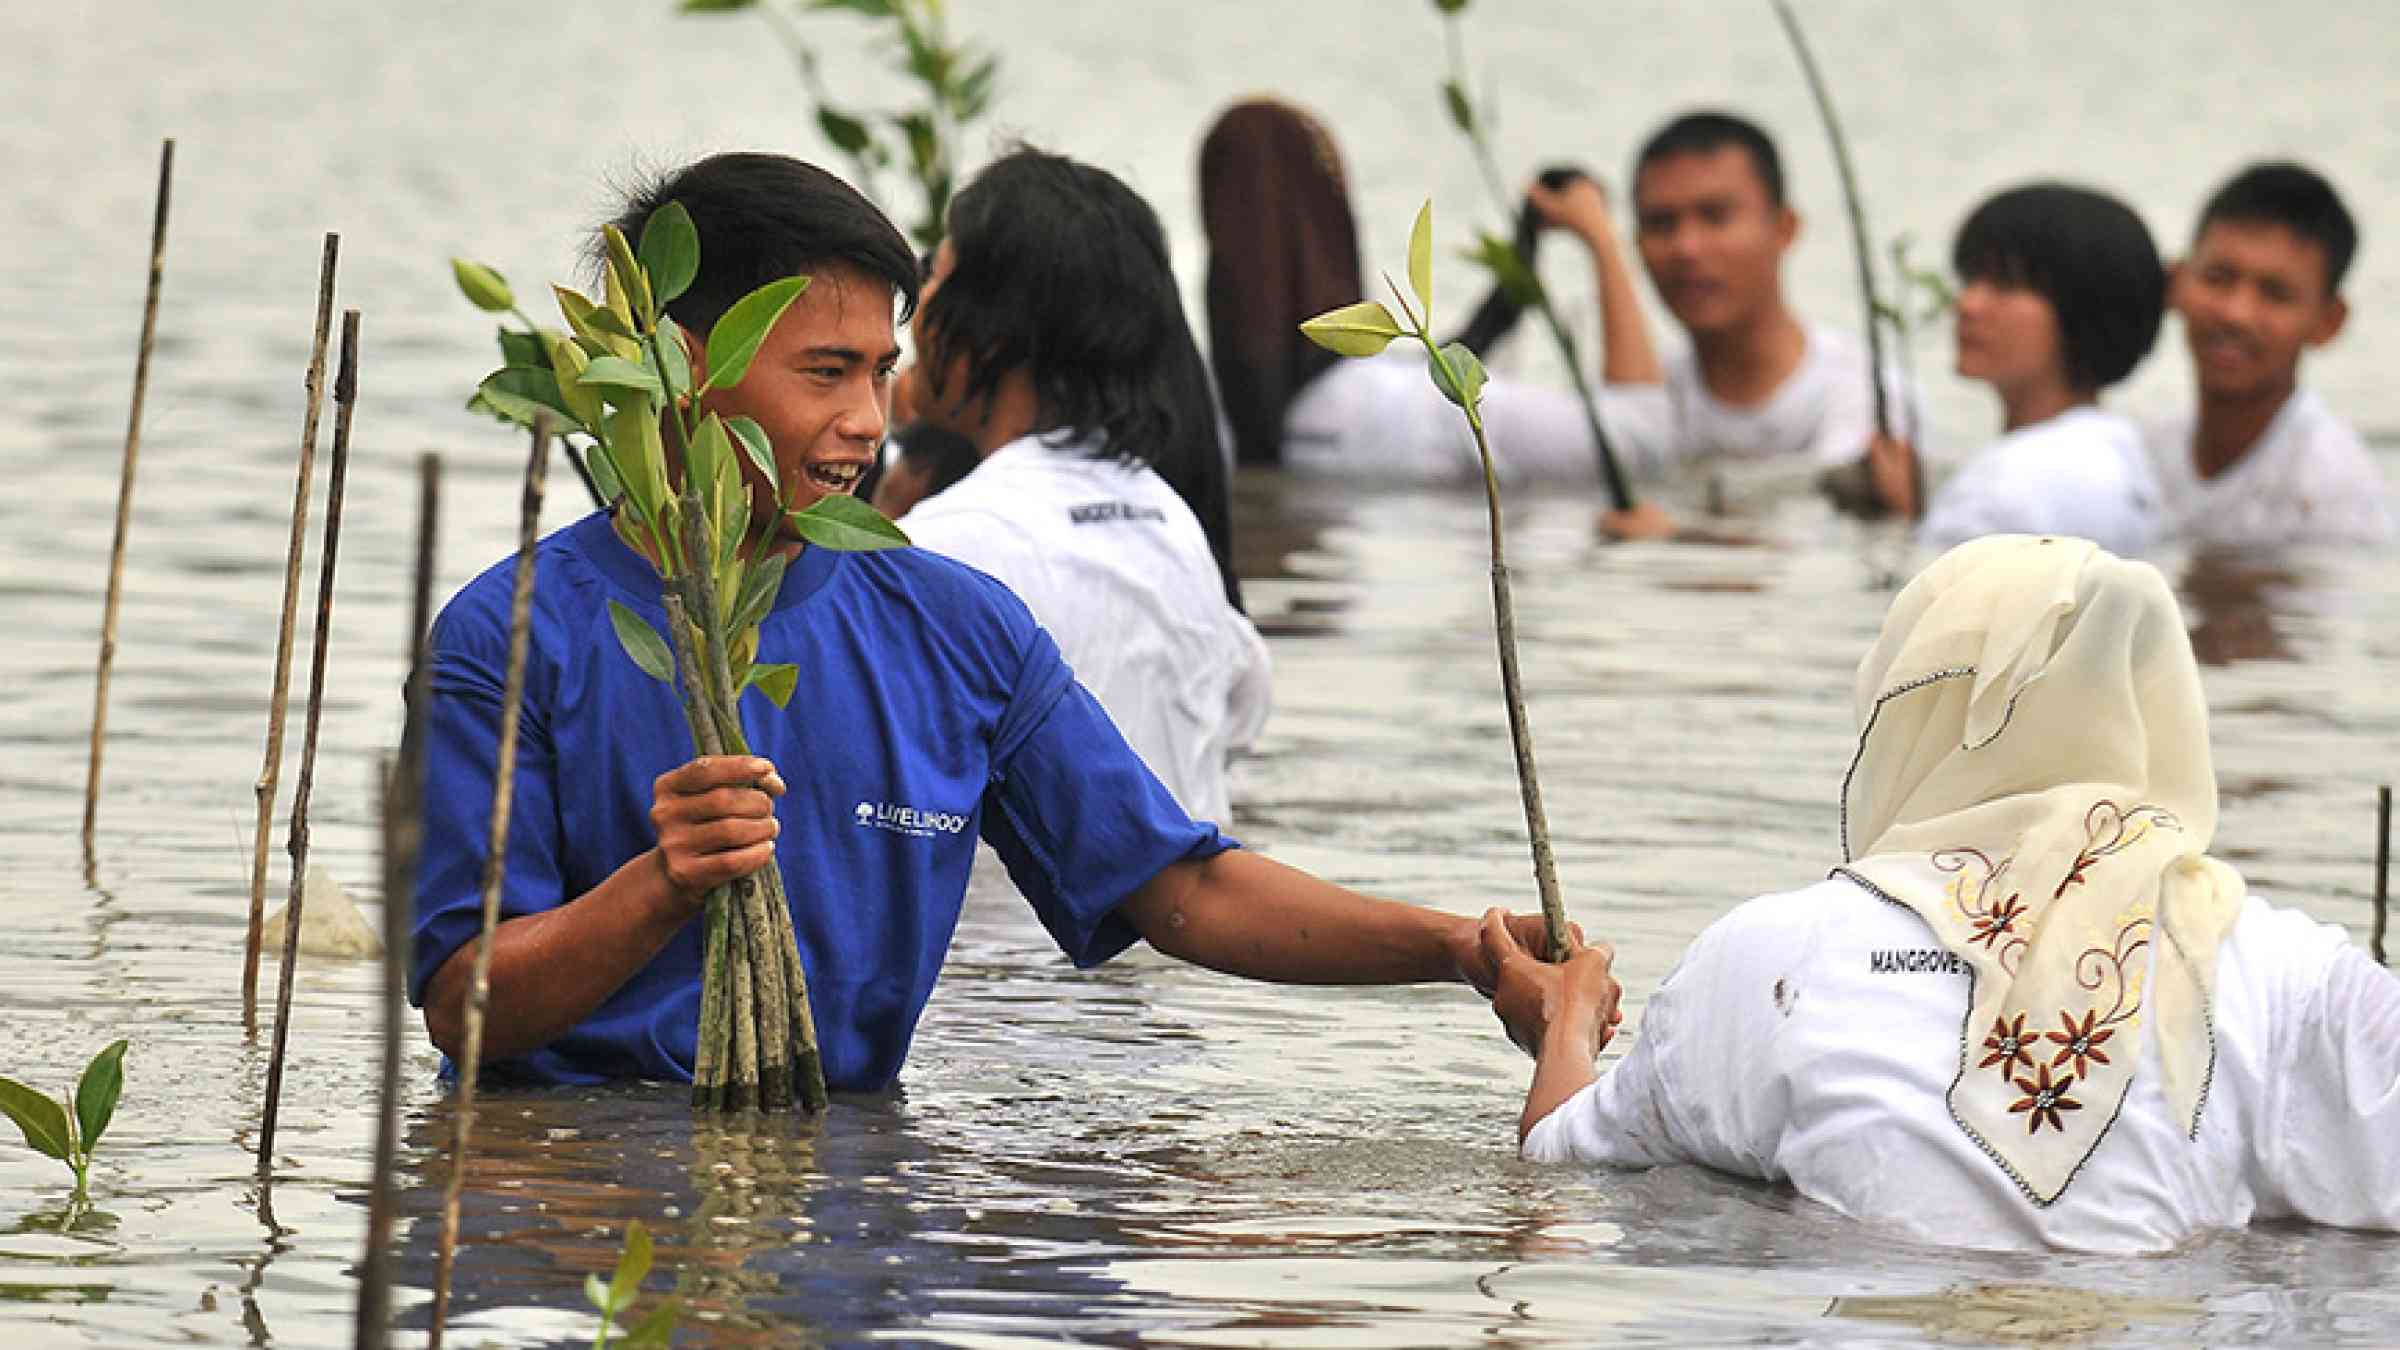 Reducing risk through planting mangroves “gotong-royong” – a traditional term indicating togetherness and assistance to reach a common goal